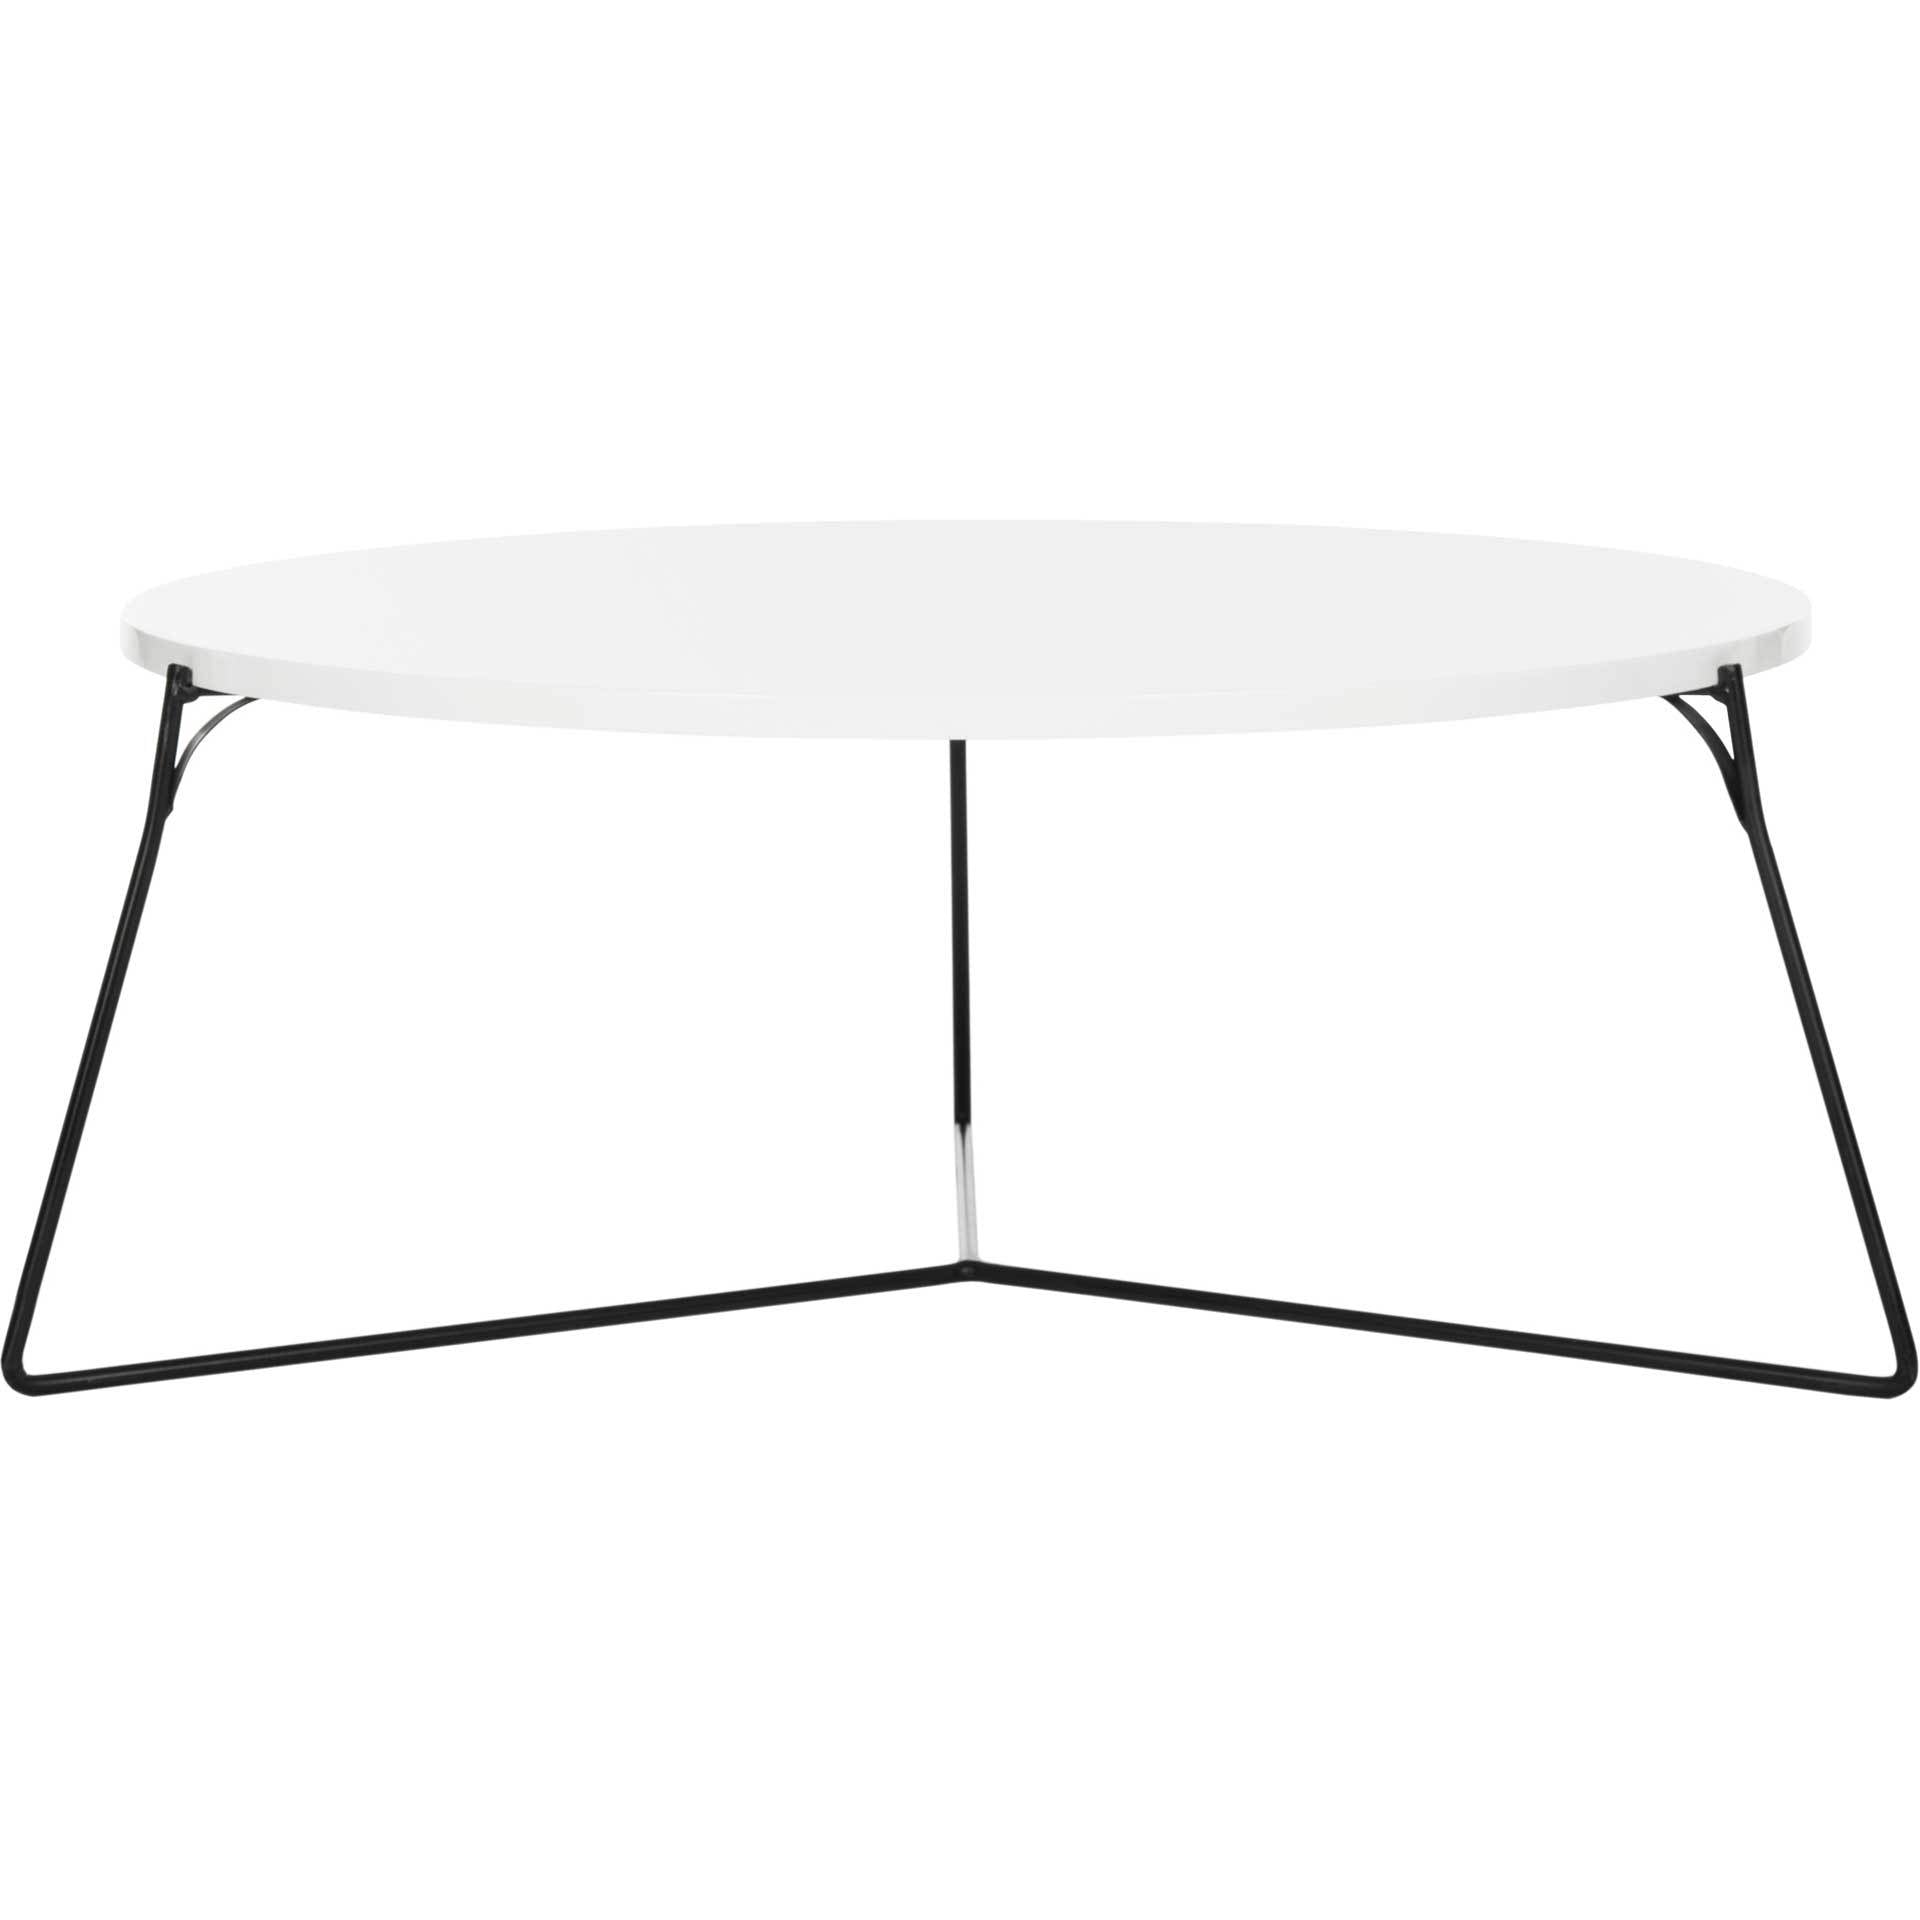 Max Lacquer Coffee Table